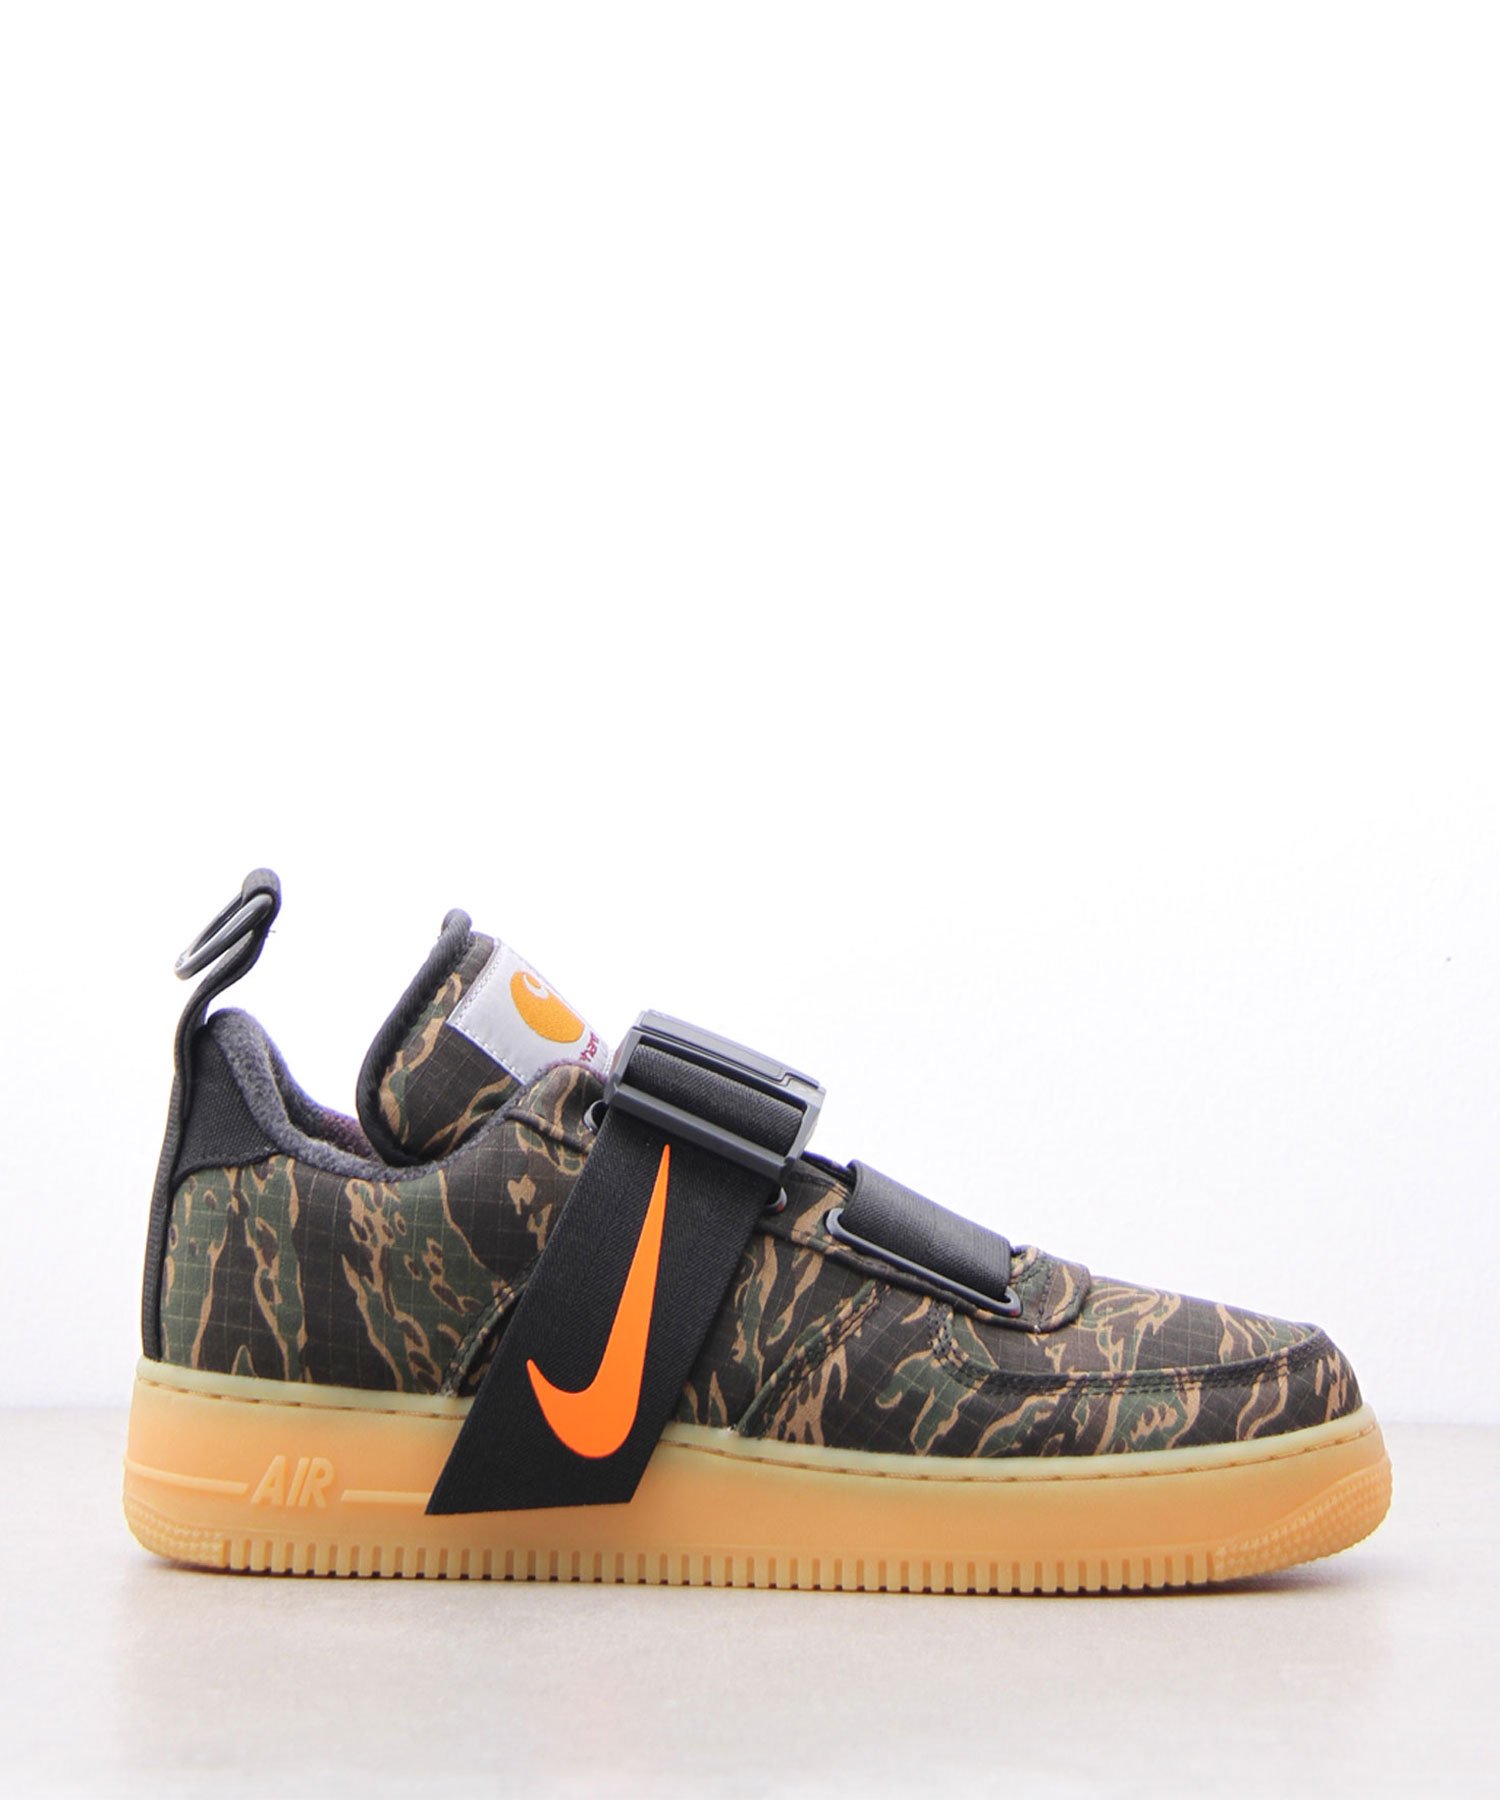 NIKE CARHARTT NIKE AIR FORE - California Outfitters |  カリフォルニアアウトフィッターズ日本公式通販サイト